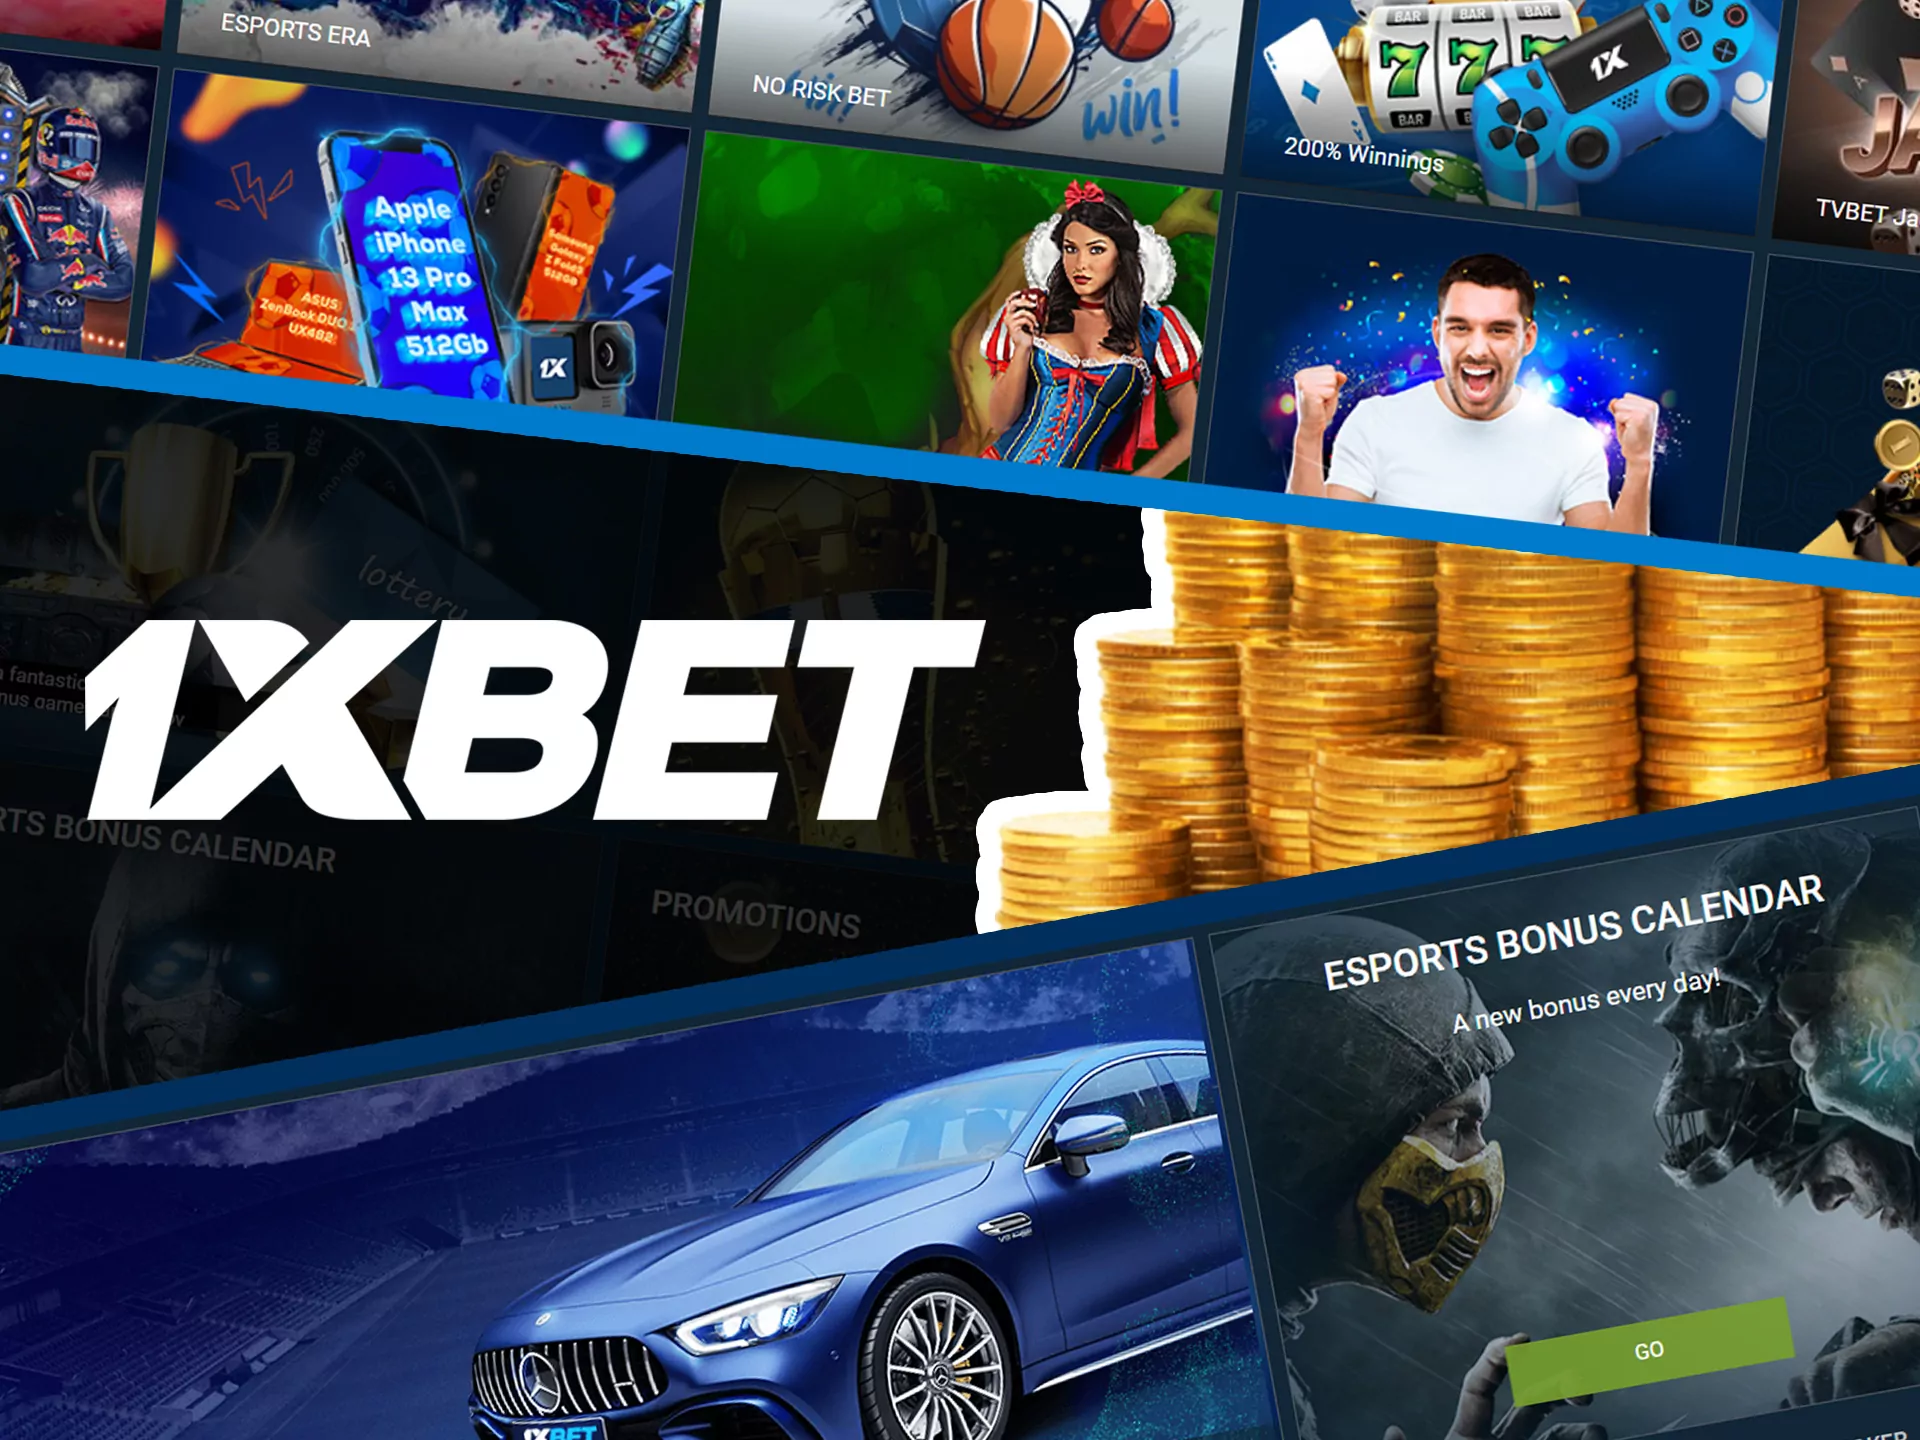 1xbet bonuses and promotions for new and regular playets.